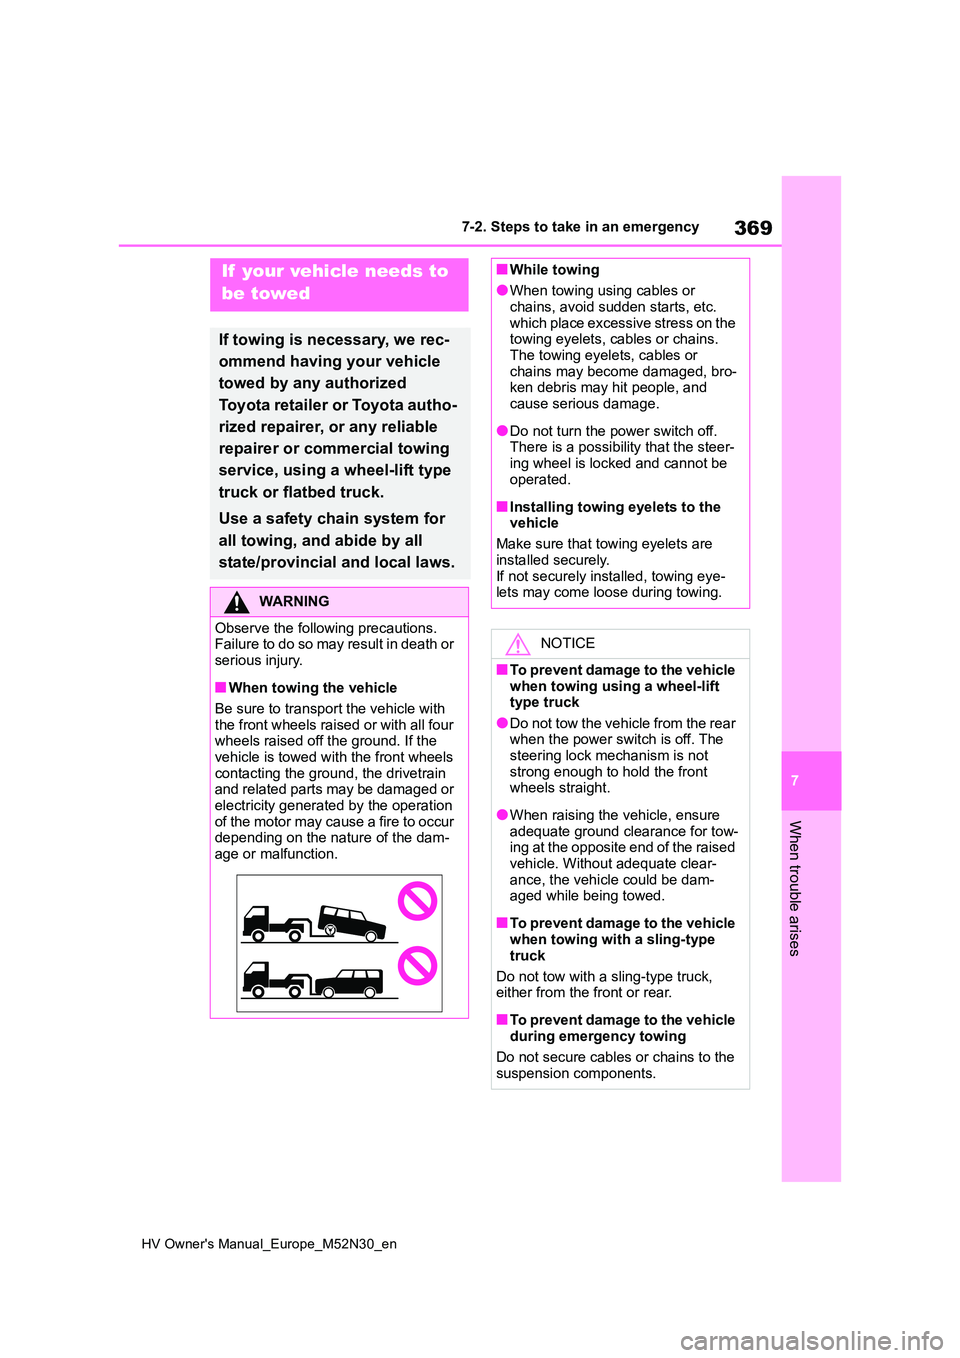 TOYOTA YARIS 2022  Owners Manual 369
7
HV Owner's Manual_Europe_M52N30_en
7-2. Steps to take in an emergency
When trouble arises
7-2.Ste ps to  take in an emerg ency
If  your vehicle needs to  
be towed
If towing is necessary, we